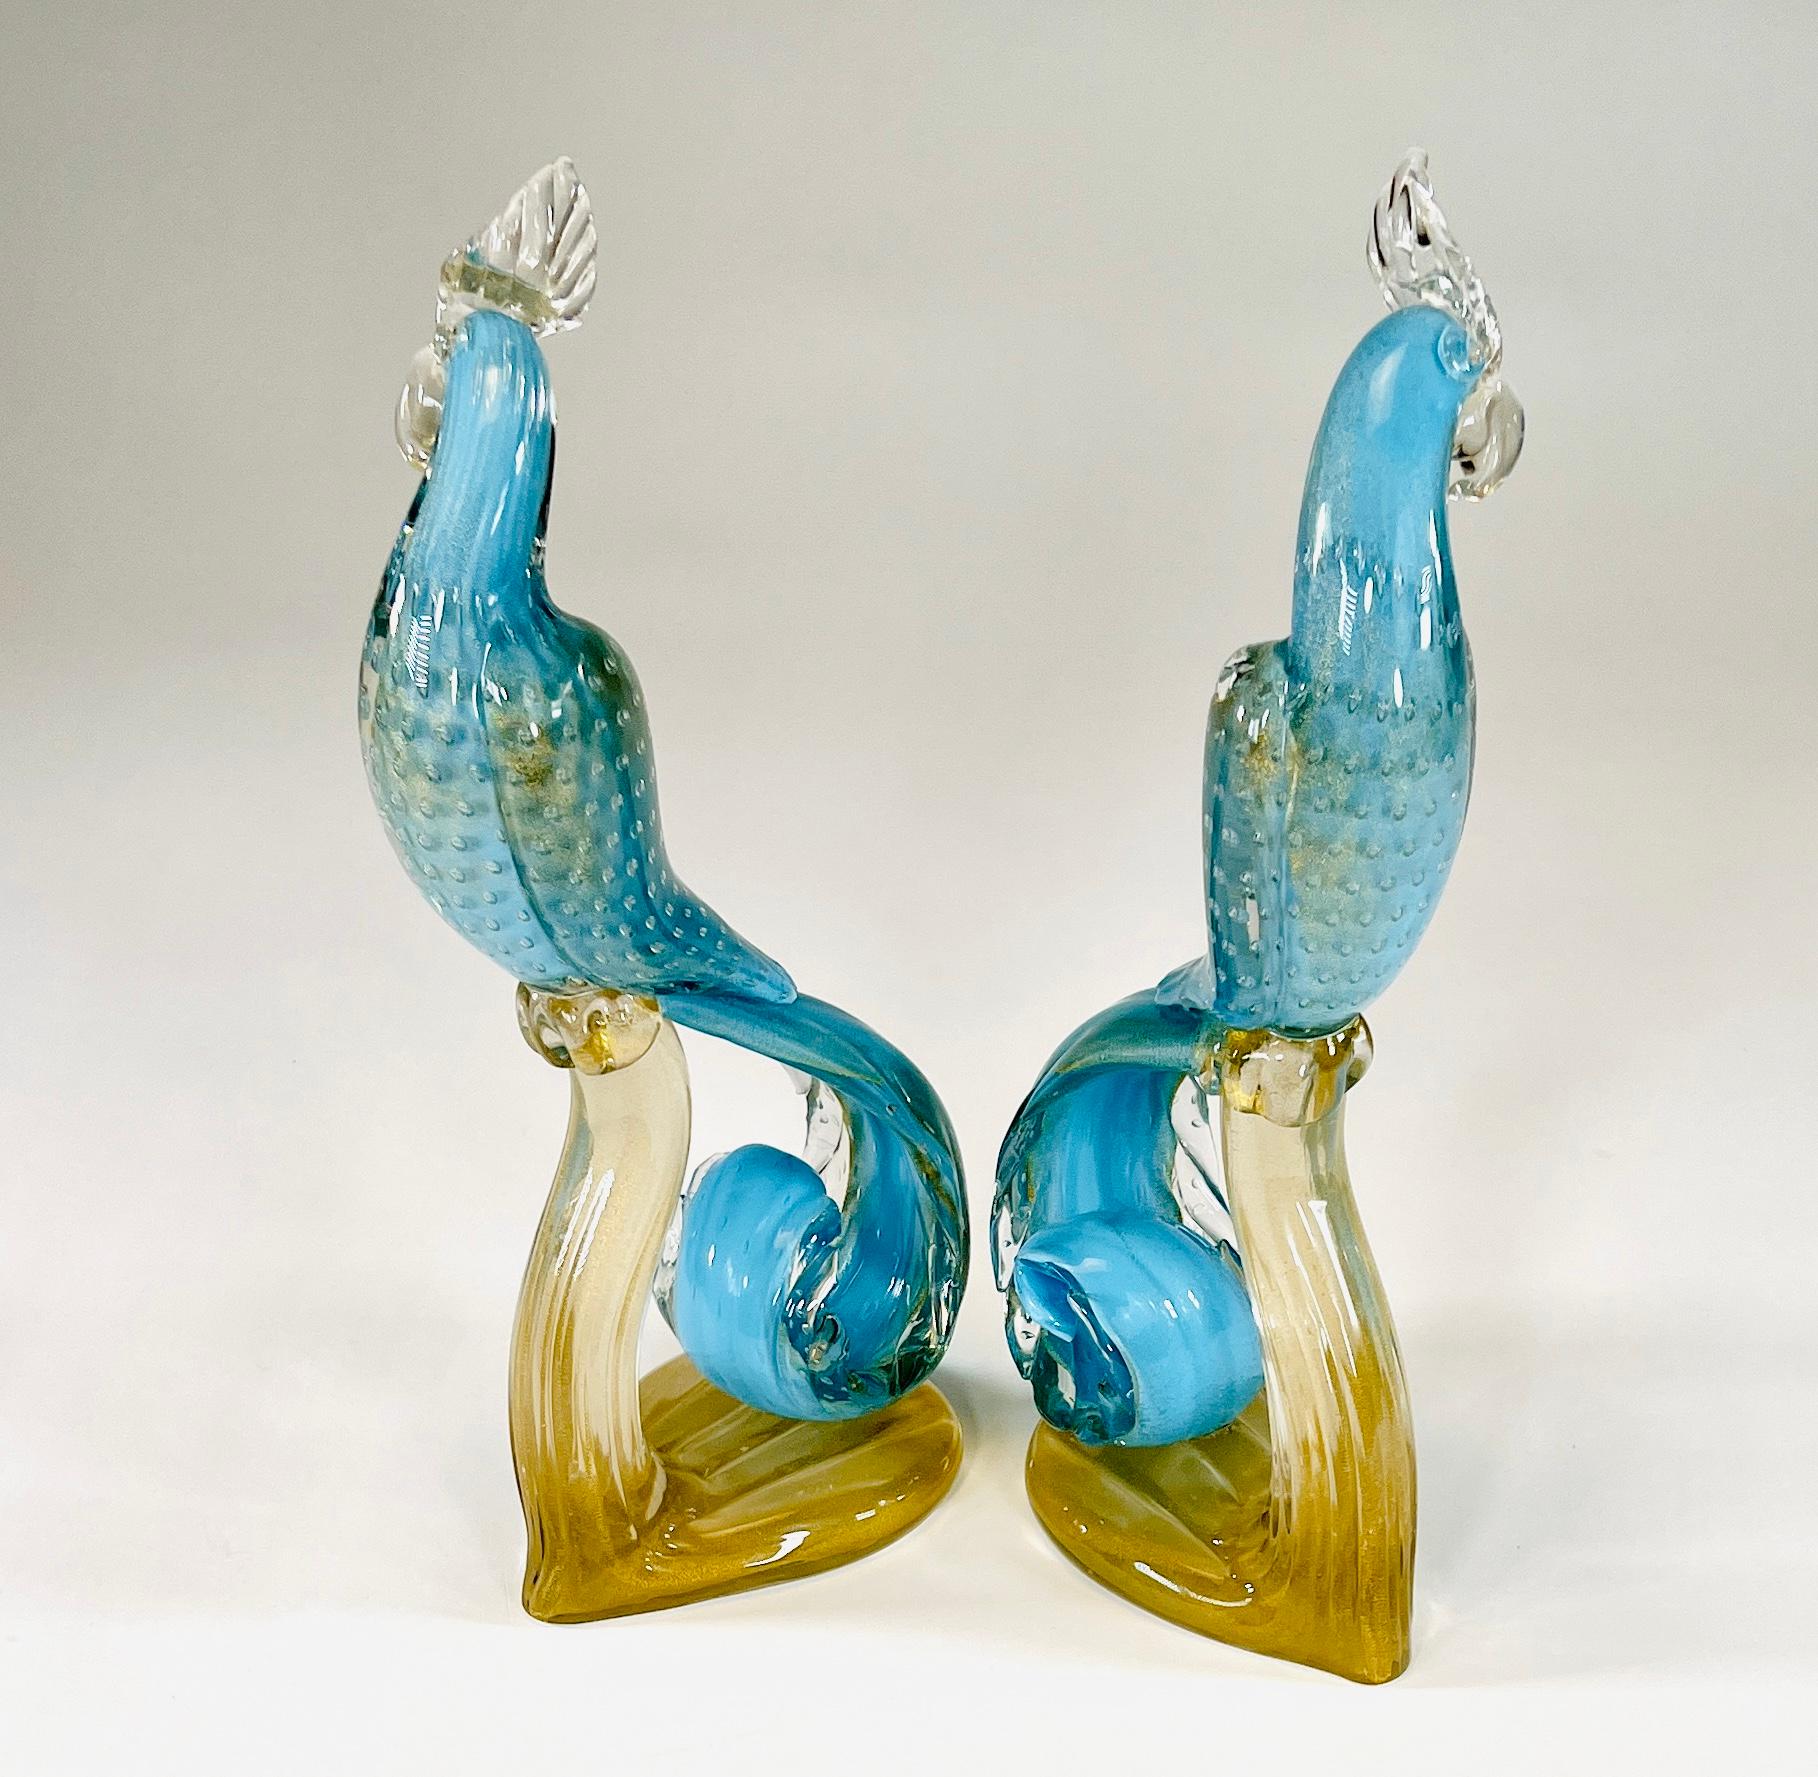 This is a matched pair of hand blown, tall and fanciful Murano 